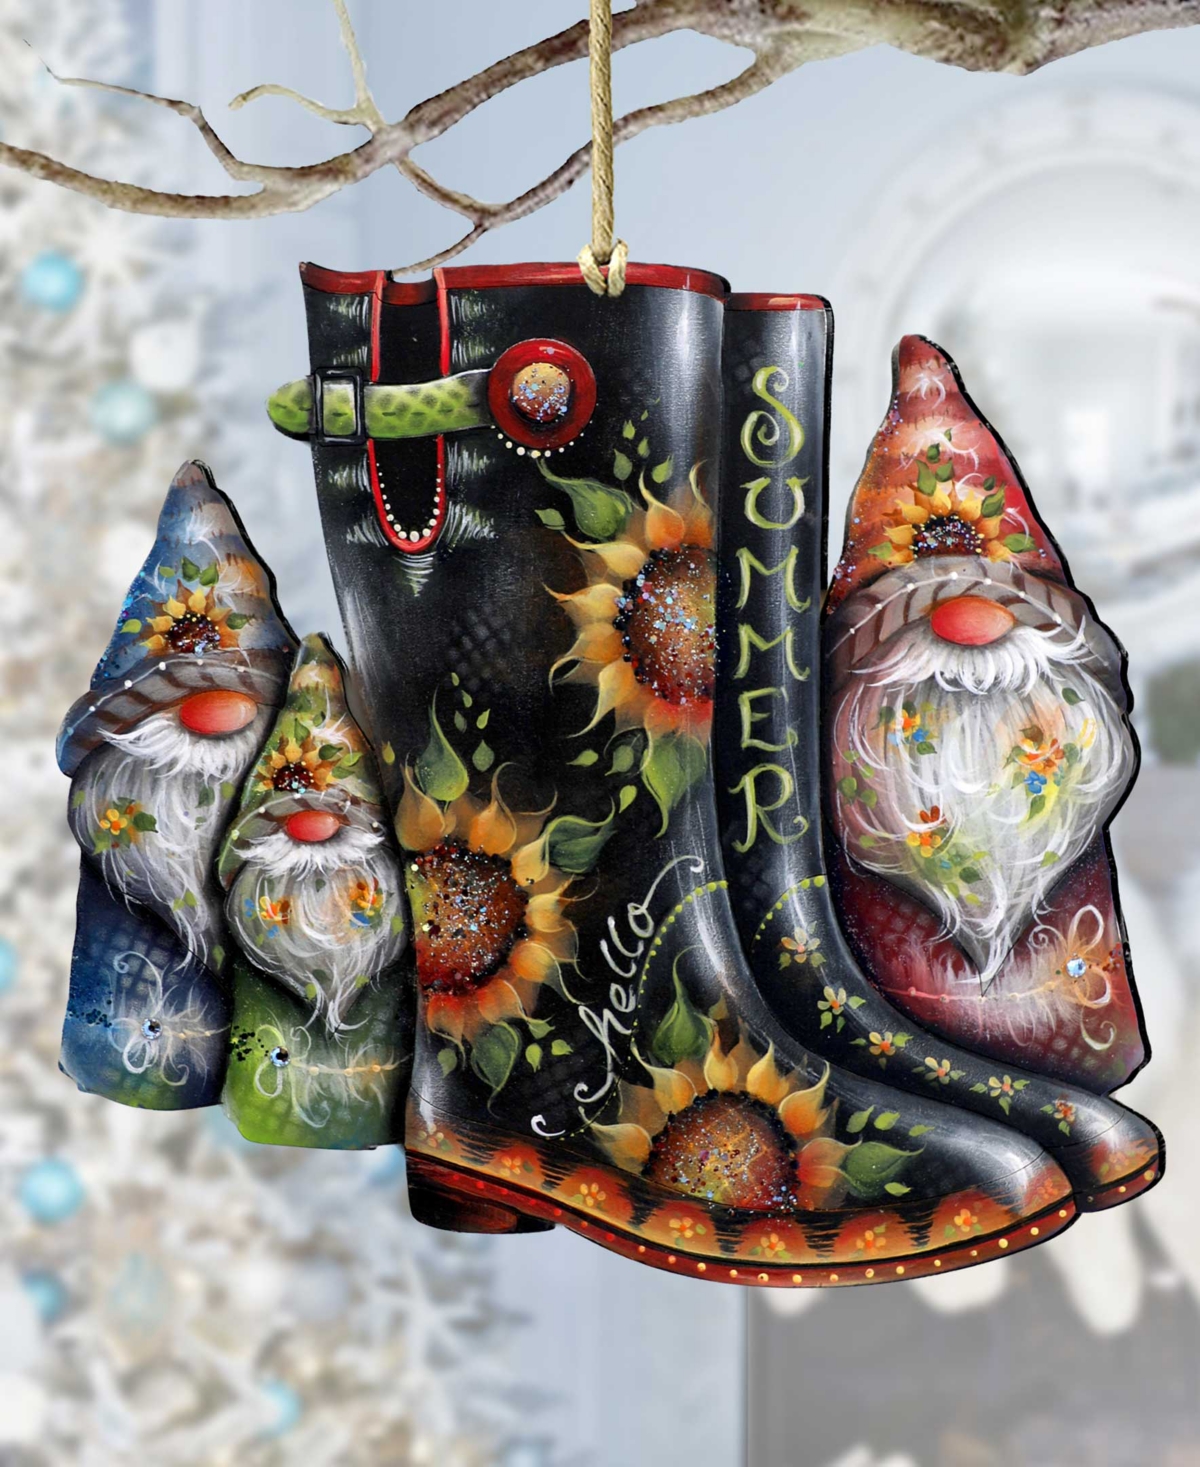 Designocracy Holiday Wooden Ornaments Hello Summer Boots Home Decor J. Mills-price In Multi Color